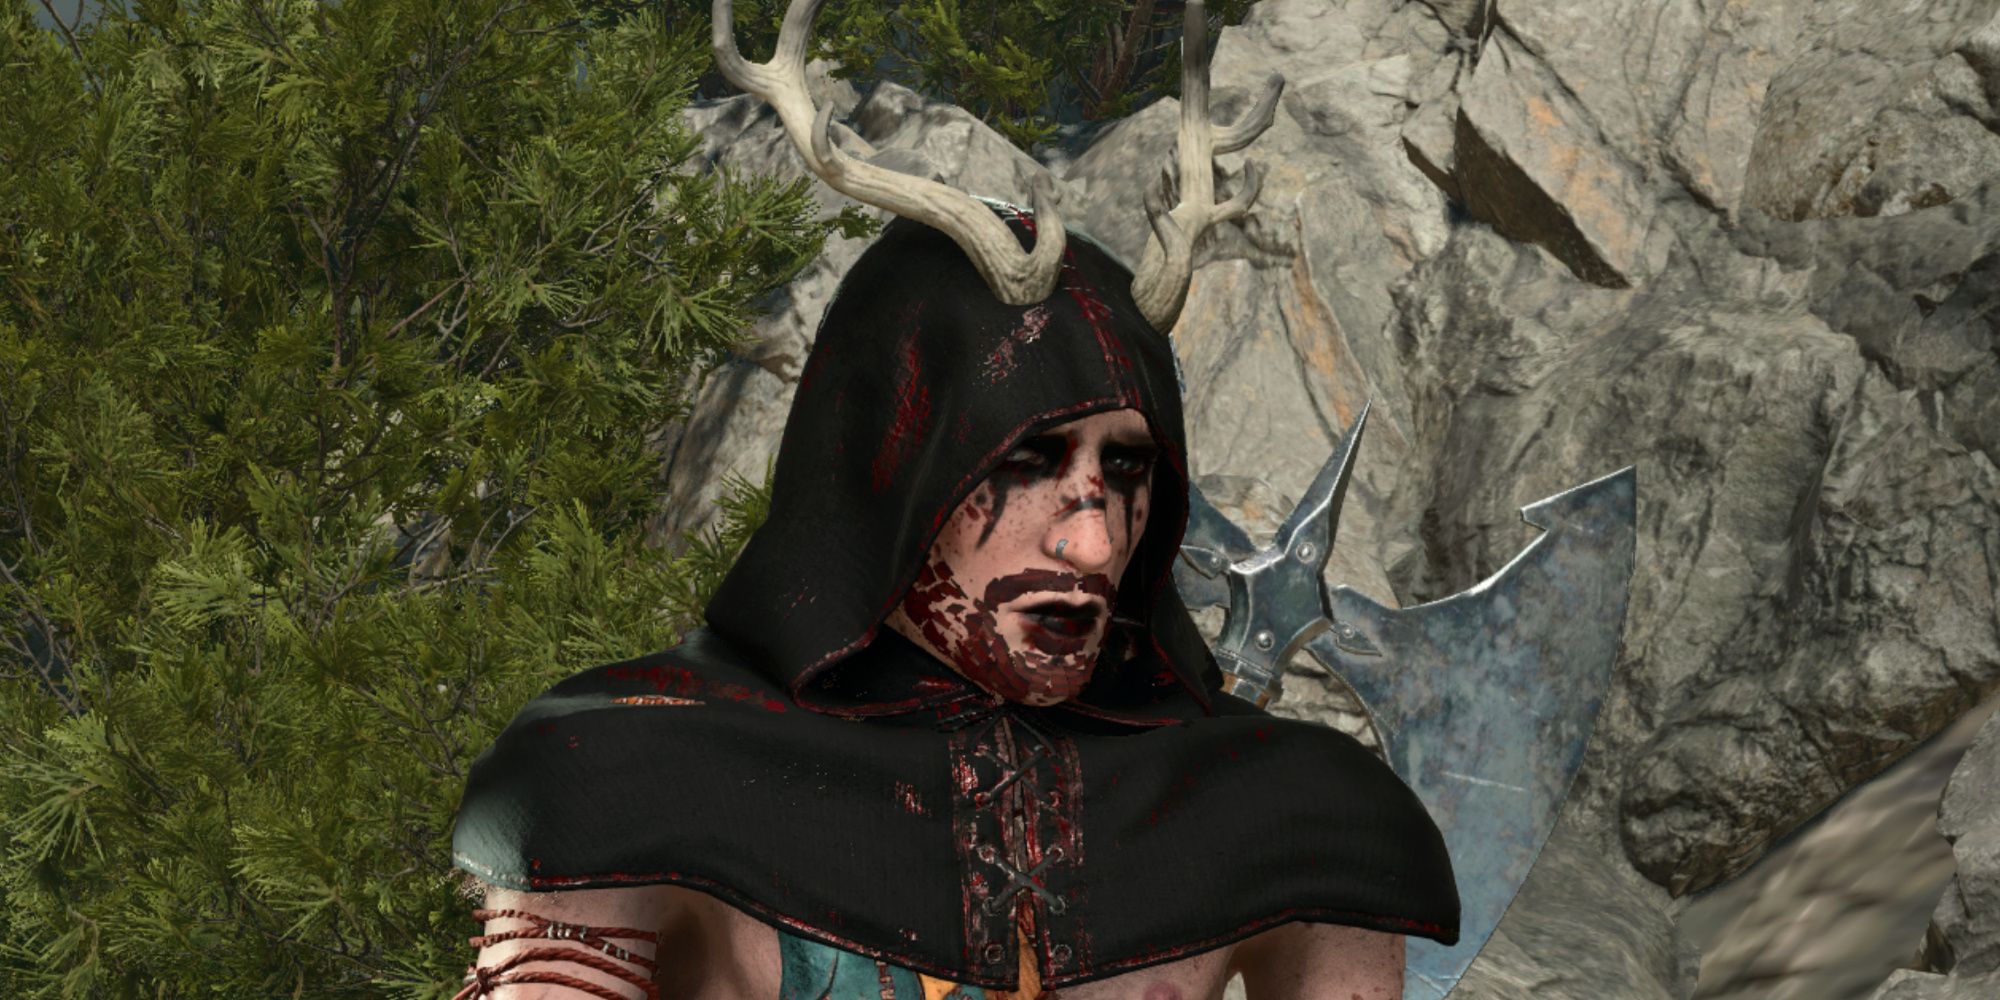 A Gnome Barbarian Modded To Have Antlers And A Black Cowl In Baldur's Gate 3